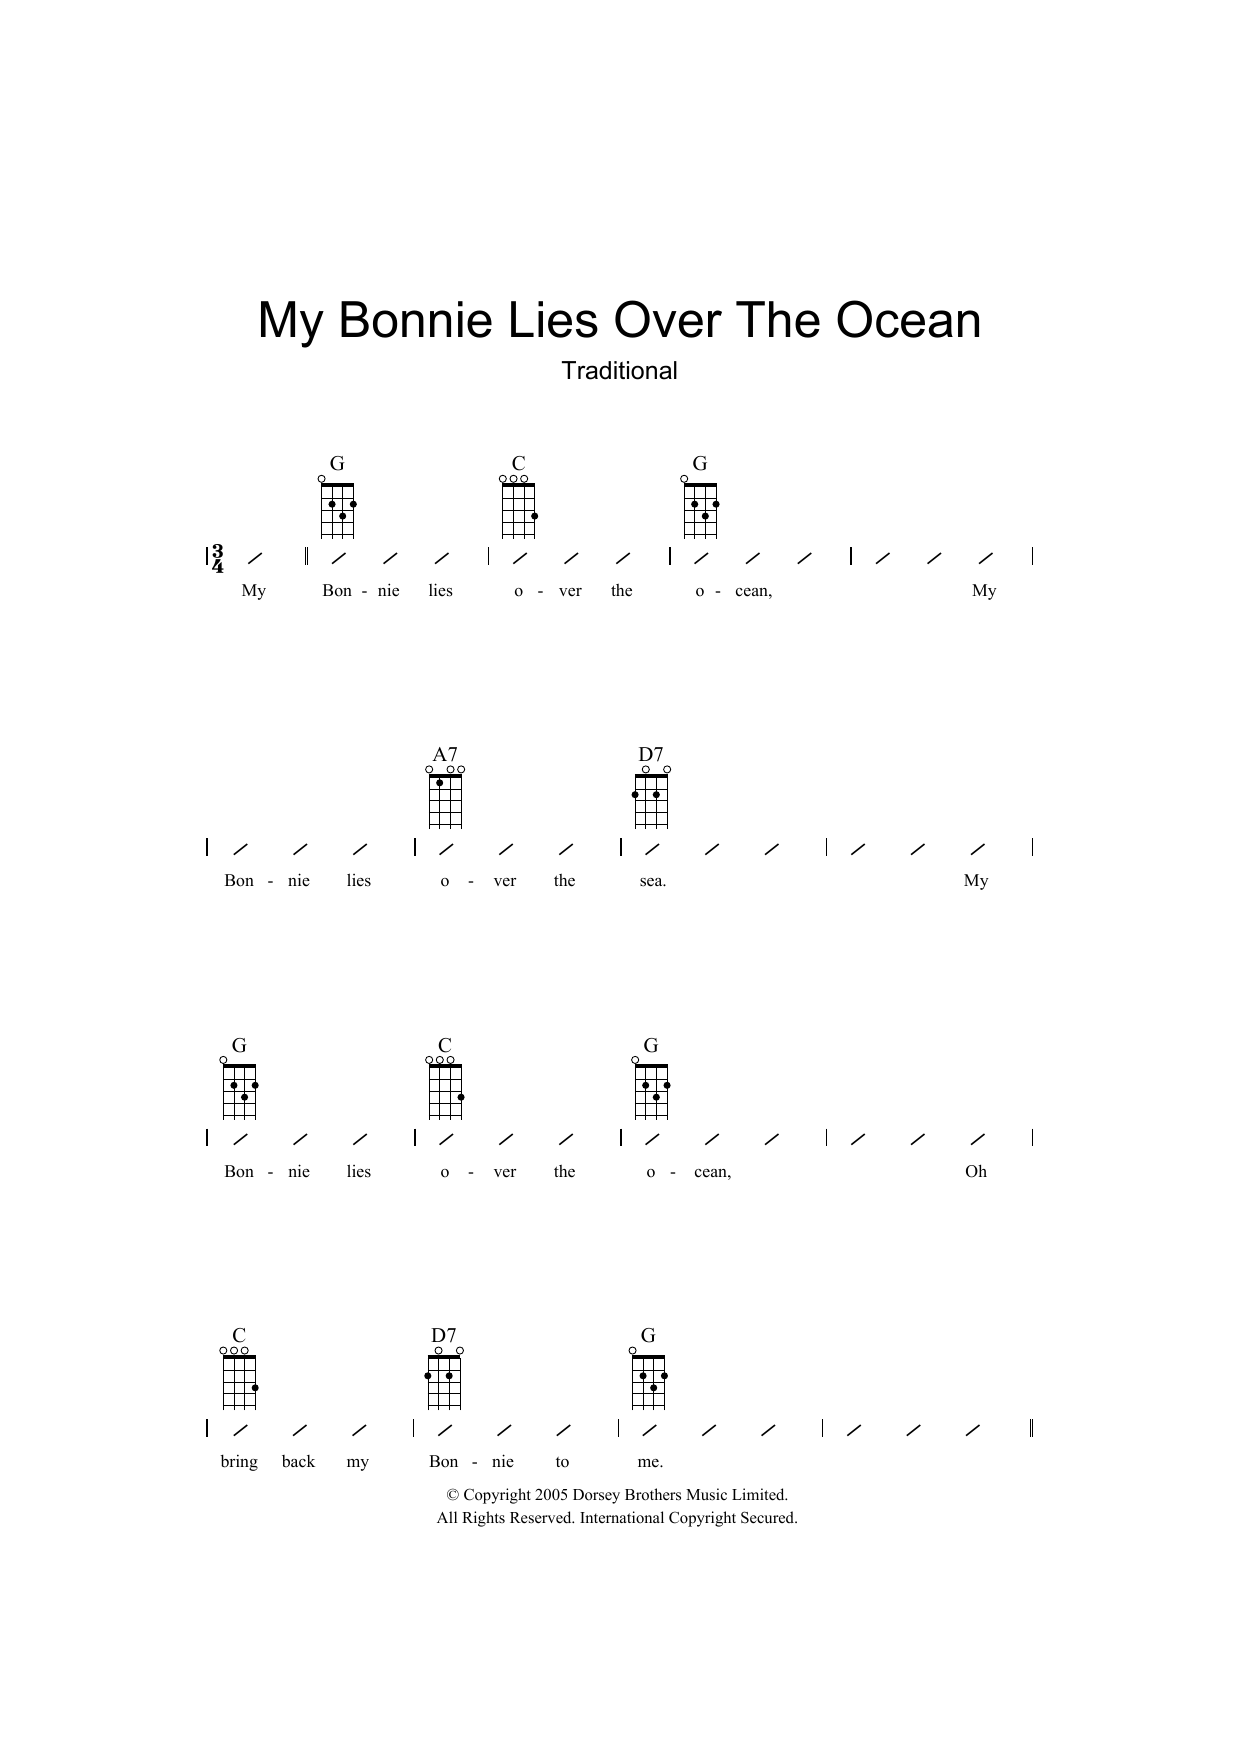 Download Traditional My Bonnie Lies Over The Ocean Sheet Music